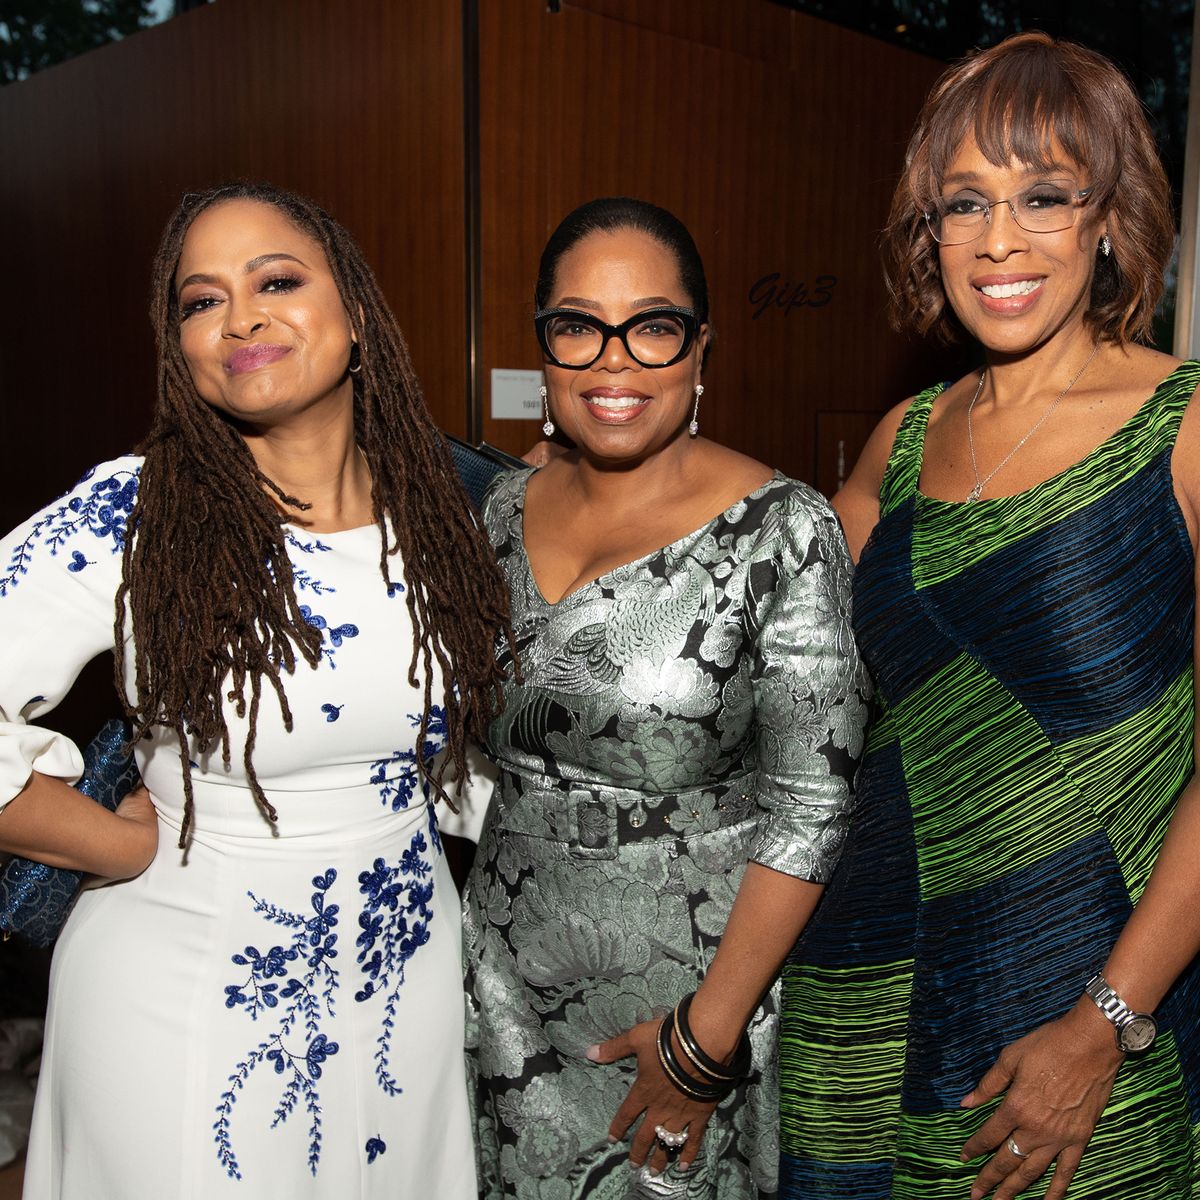 "Watching Oprah: The Oprah Winfrey Show And American Culture" Press Preview